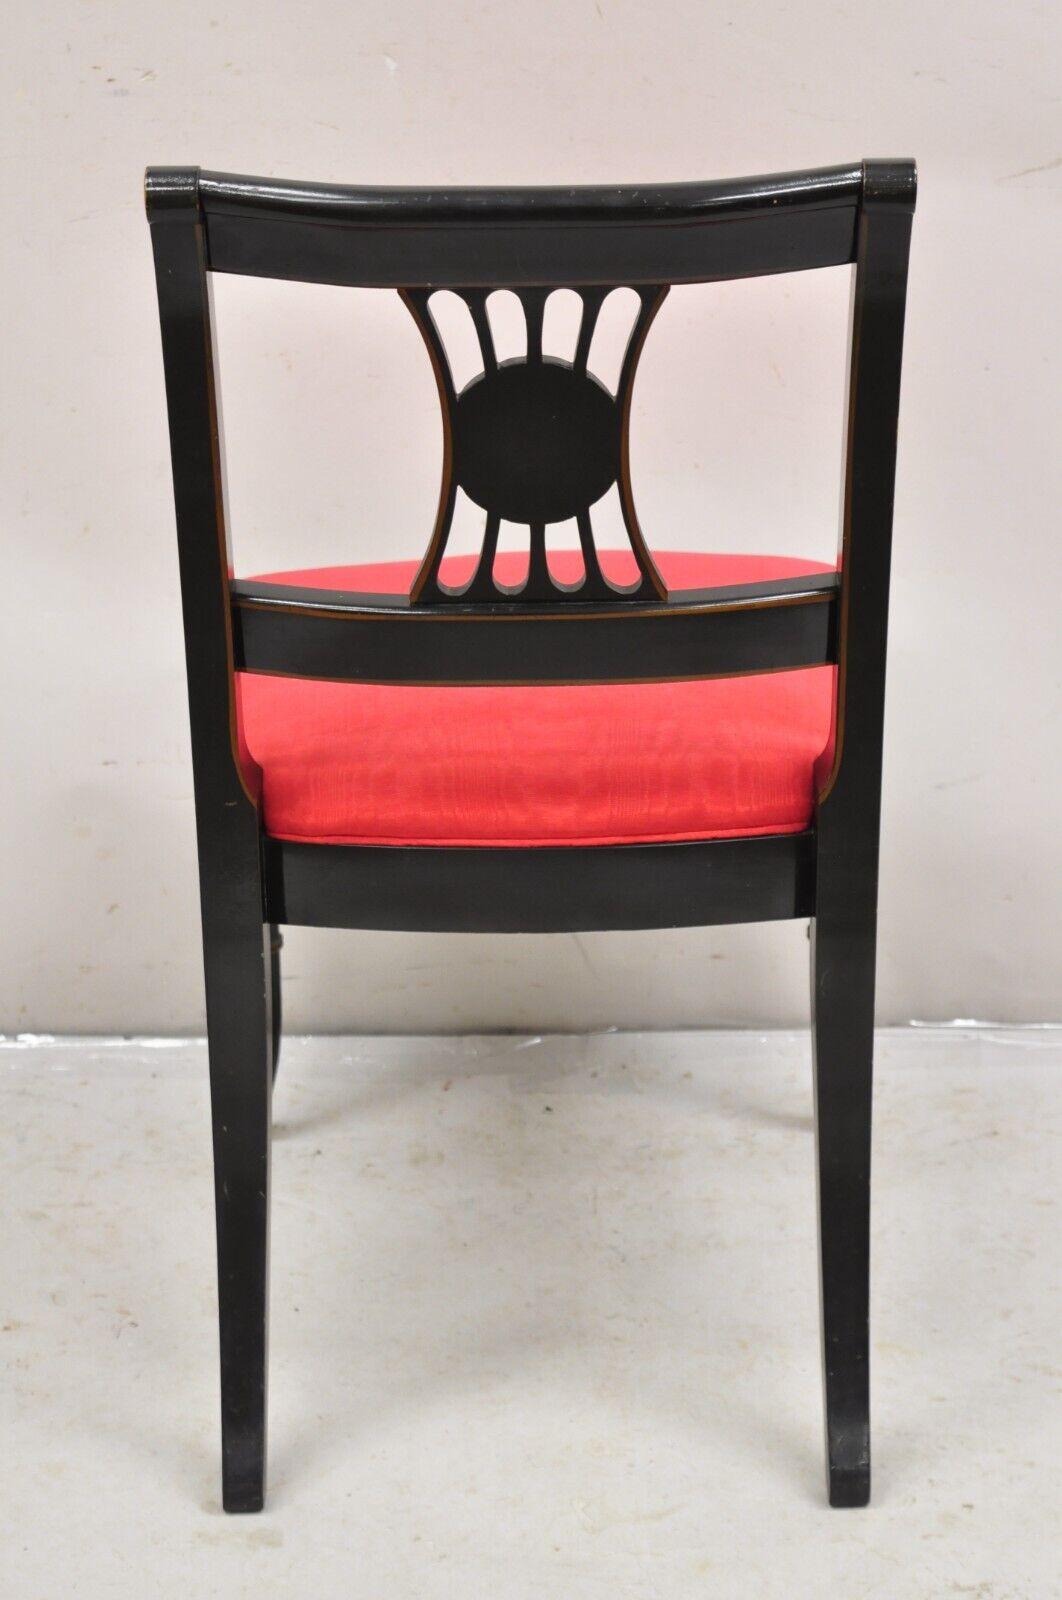 Vintage Chinoiserie English Regency Style Black Painted Dining Chairs - Set of 6 For Sale 2